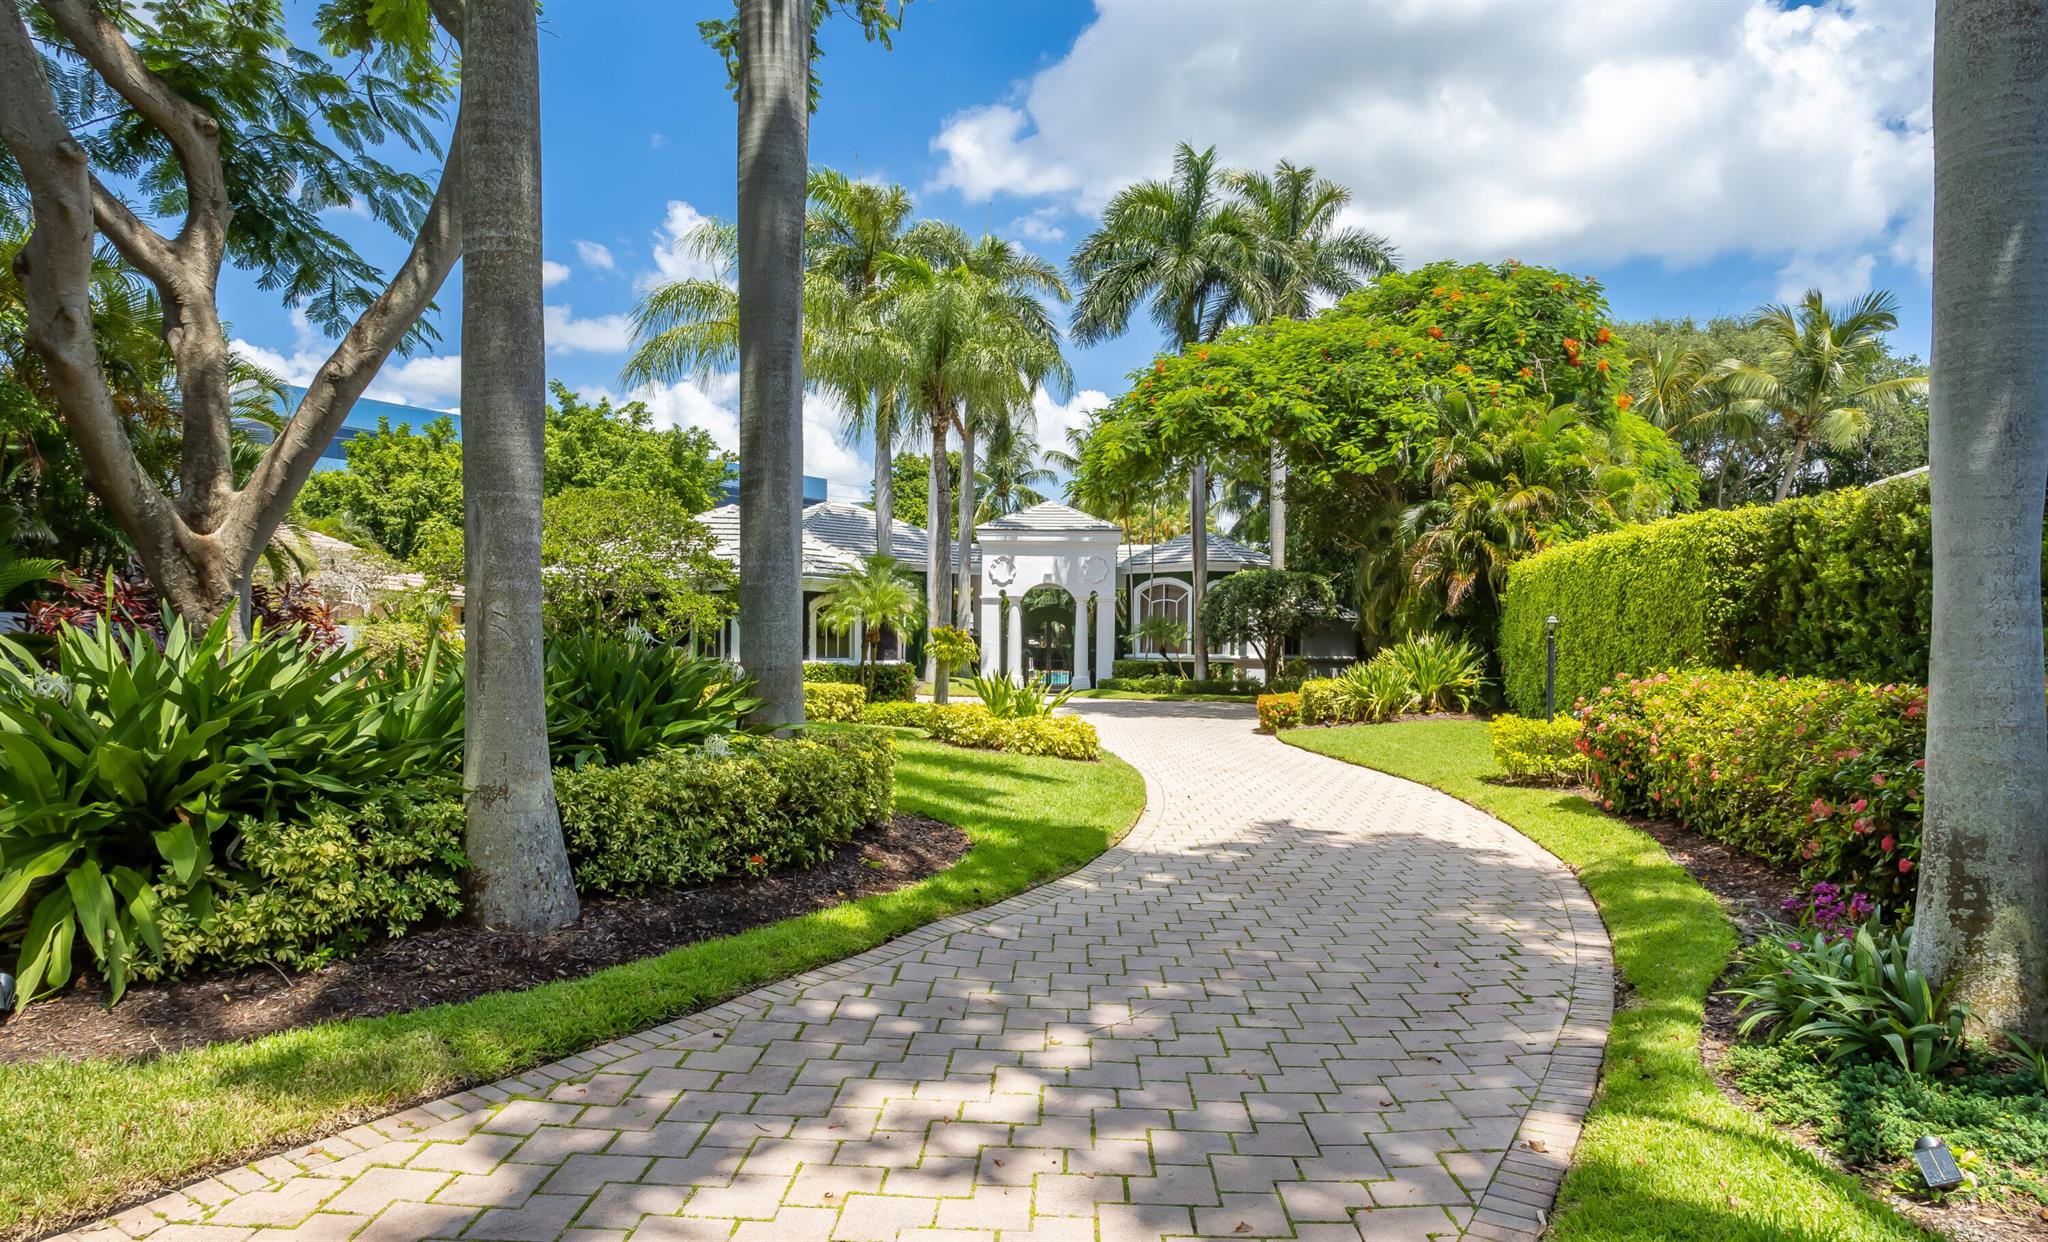 This updated private custom courtyard residence sits on an oversize off-water homesite. The main house blends extensive glass and volume ceiling open space. Located within the only private deep-water gated ultra luxury single family community in Boca Raton. . A resort-style pool and patio continues the serene tropical landscaping and its tranquility. Featured are three bedrooms and a library in the main residence in a two room guest house with exterior entertaining bar and summer kitchen.Seller will consider creative sale terms including a trade or exchange. Additionally, there's a den or library space, which could be used as a private retreat for reading or work. To add to the versatility and space, there's also a separate carriage house that includes two bedrooms. This extra living space could be ideal for guests, extended family members, or staff.

For those who appreciate automobiles, the property offers a four-bay garage, catering to car enthusiasts who want to keep their vehicles in a secure and convenient space.

Overall, this rental property appears to offer a luxurious and comfortable lifestyle within an exclusive gated community. Its beautifully remodeled interior, exquisite furnishings, spacious outdoor area, and additional living quarters make it an appealing option for those who value elegance and convenience.


Courtyard home
Long private driveway
Lush landscaping
Chandelier negotiable
Furniture negotiable

Not impact windows

4 car garage
Iron gate entrance way
Leads to a Courtyard pool
With circular spa
Fenced in backyard
ADT security system
Summer kitchen
Built in grill

1 Rheem AC
2 Rudd AC


Volume ceilings
Floor to ceiling windows
Ceramic floors

Living room
Built in entertainment area
Built in shelves

Kitchen and breakfast area
Marble waterfall island
Center island sink
Under island storage
White shaker cabinets
Built in wine cooler - 18 bottle
GE profile Dishwasher
GE profile electric stove and oven
GE profile microwave
Samsung Refrigerator

Open to Family room

Dining room
Open to living room and kitchen

Office/den
Built in cabinets and shelves
Includes built in file cabinets
Marble tops on cabinets
Wet bar area
Sink
Minifridge
Sliding pocket doors

Primary bedroom
Opens up to pool courtyard
Double doors
2 walk in custom closets

Primary bathroom
Water closet
Toilet and bidet
Walk in shower
Frameless shower doors
Full wall mirror
Double sink vanity
Granite counter tops
Jacuzzi whirlpool
Elevated with steps - marble
Decorative greenery


Powder room

Utility room
Marble countertop
Built in shaker cabinets
Samsung washer and dryer



Bedroom 2/3
Joined by bathroom
Granite top, single sink vanity
Separate shower and water closet

Garage connects to an outdoor sitting area
Covered patio with iron gate enclosure


Guest house
Open living area
Sink vanity
Cabana bathroom
Full bathroom
Walk in shower
Bedroom
Currently as gym
Built in shelves